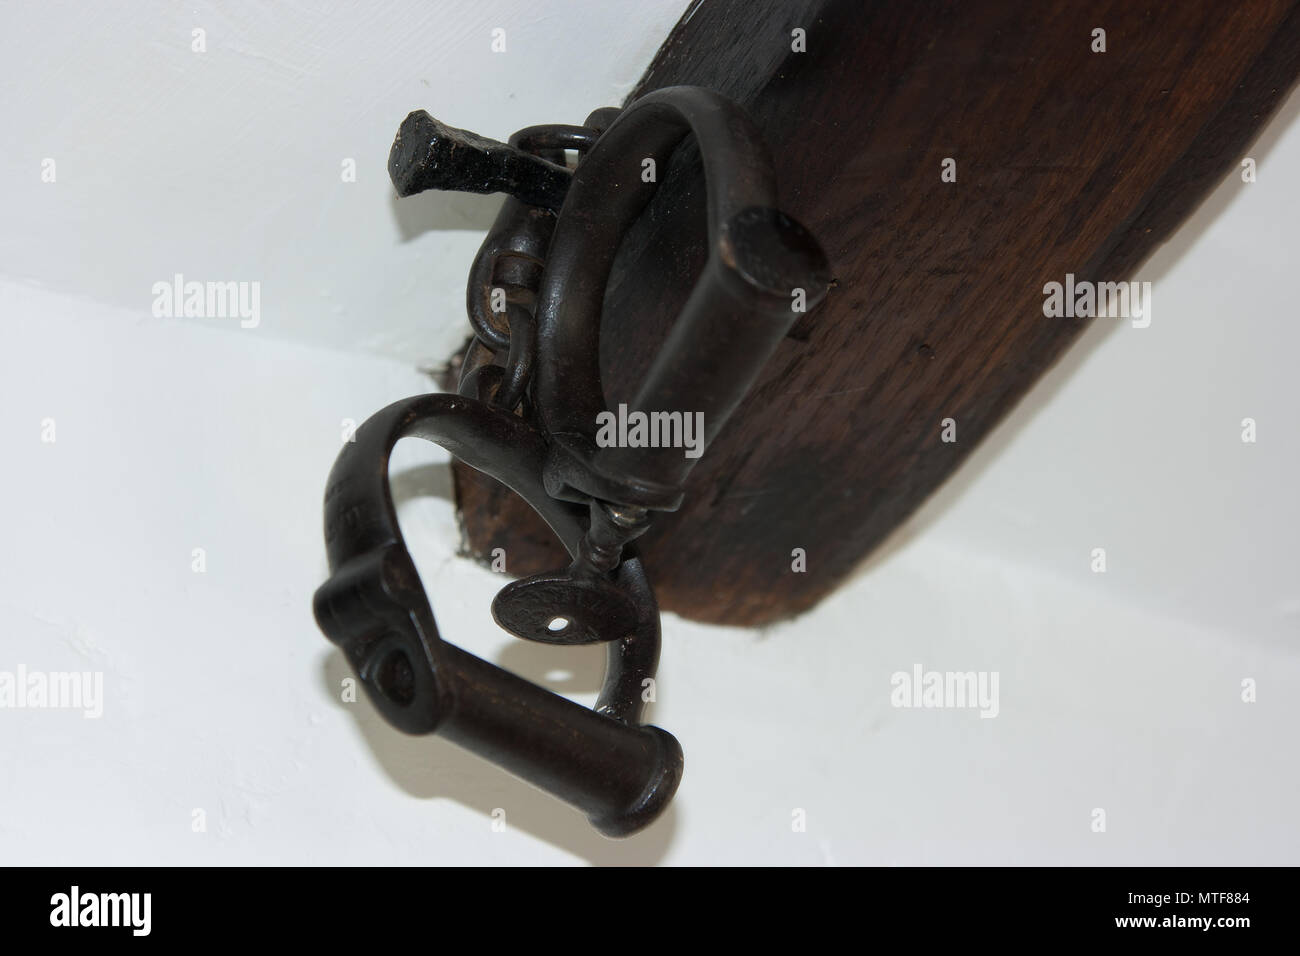 Vintage hand-forged iron handcuffs and key hanging on old oak beam Stock Photo